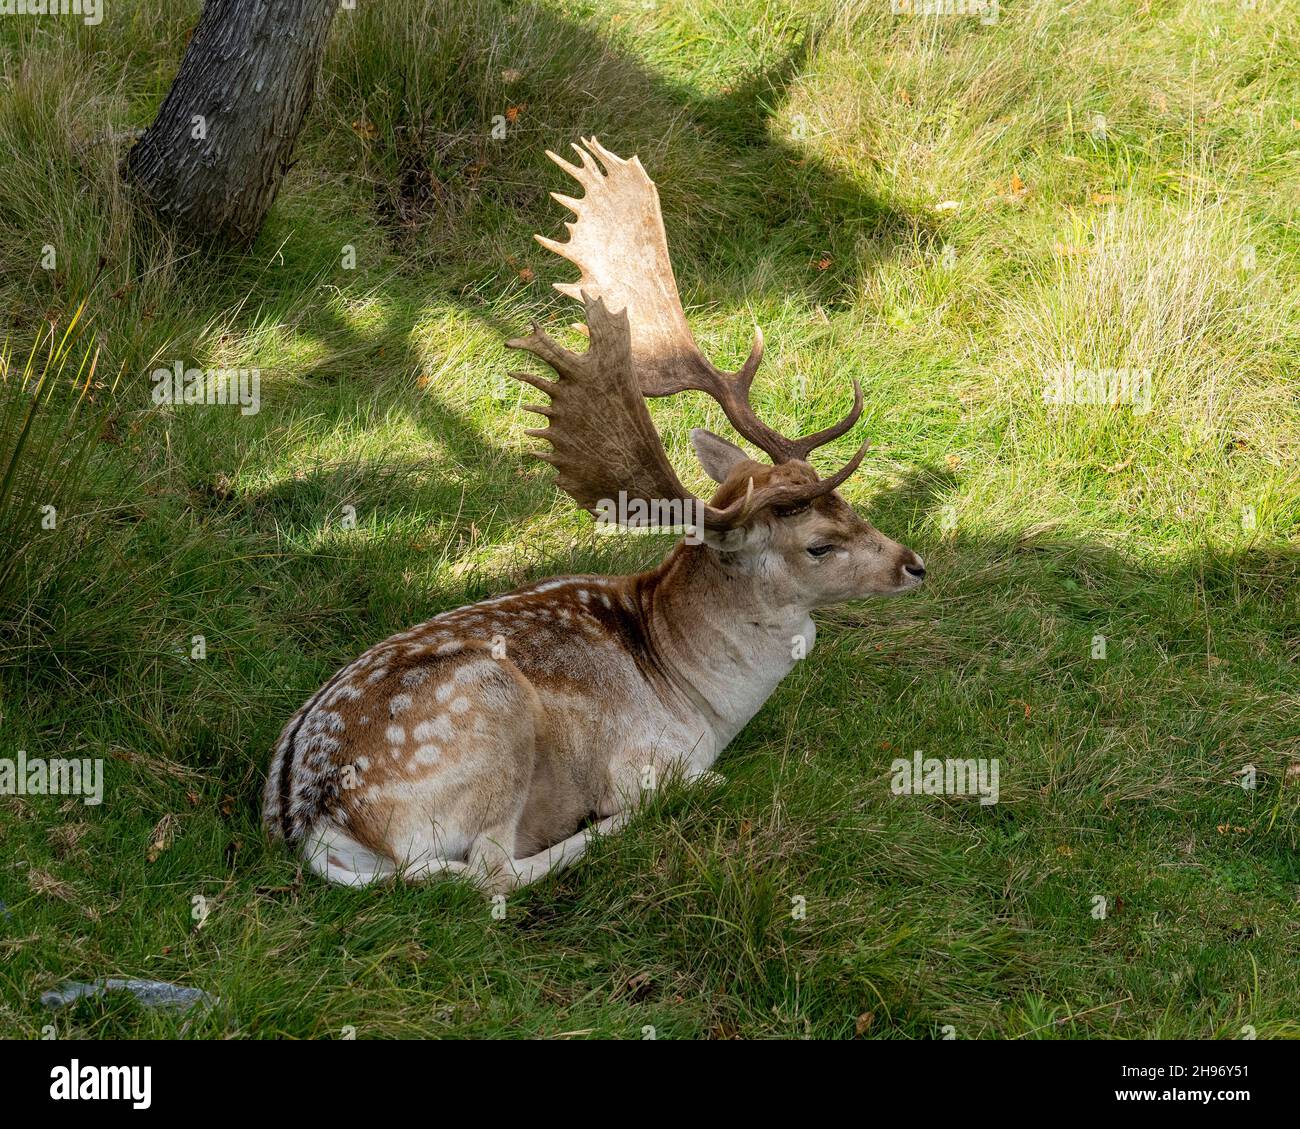 Deer close-up aerial view resting on grass displaying antlers and brow spot fur coat in its environment and habitat surrounding. Fallow Deer Image. Stock Photo